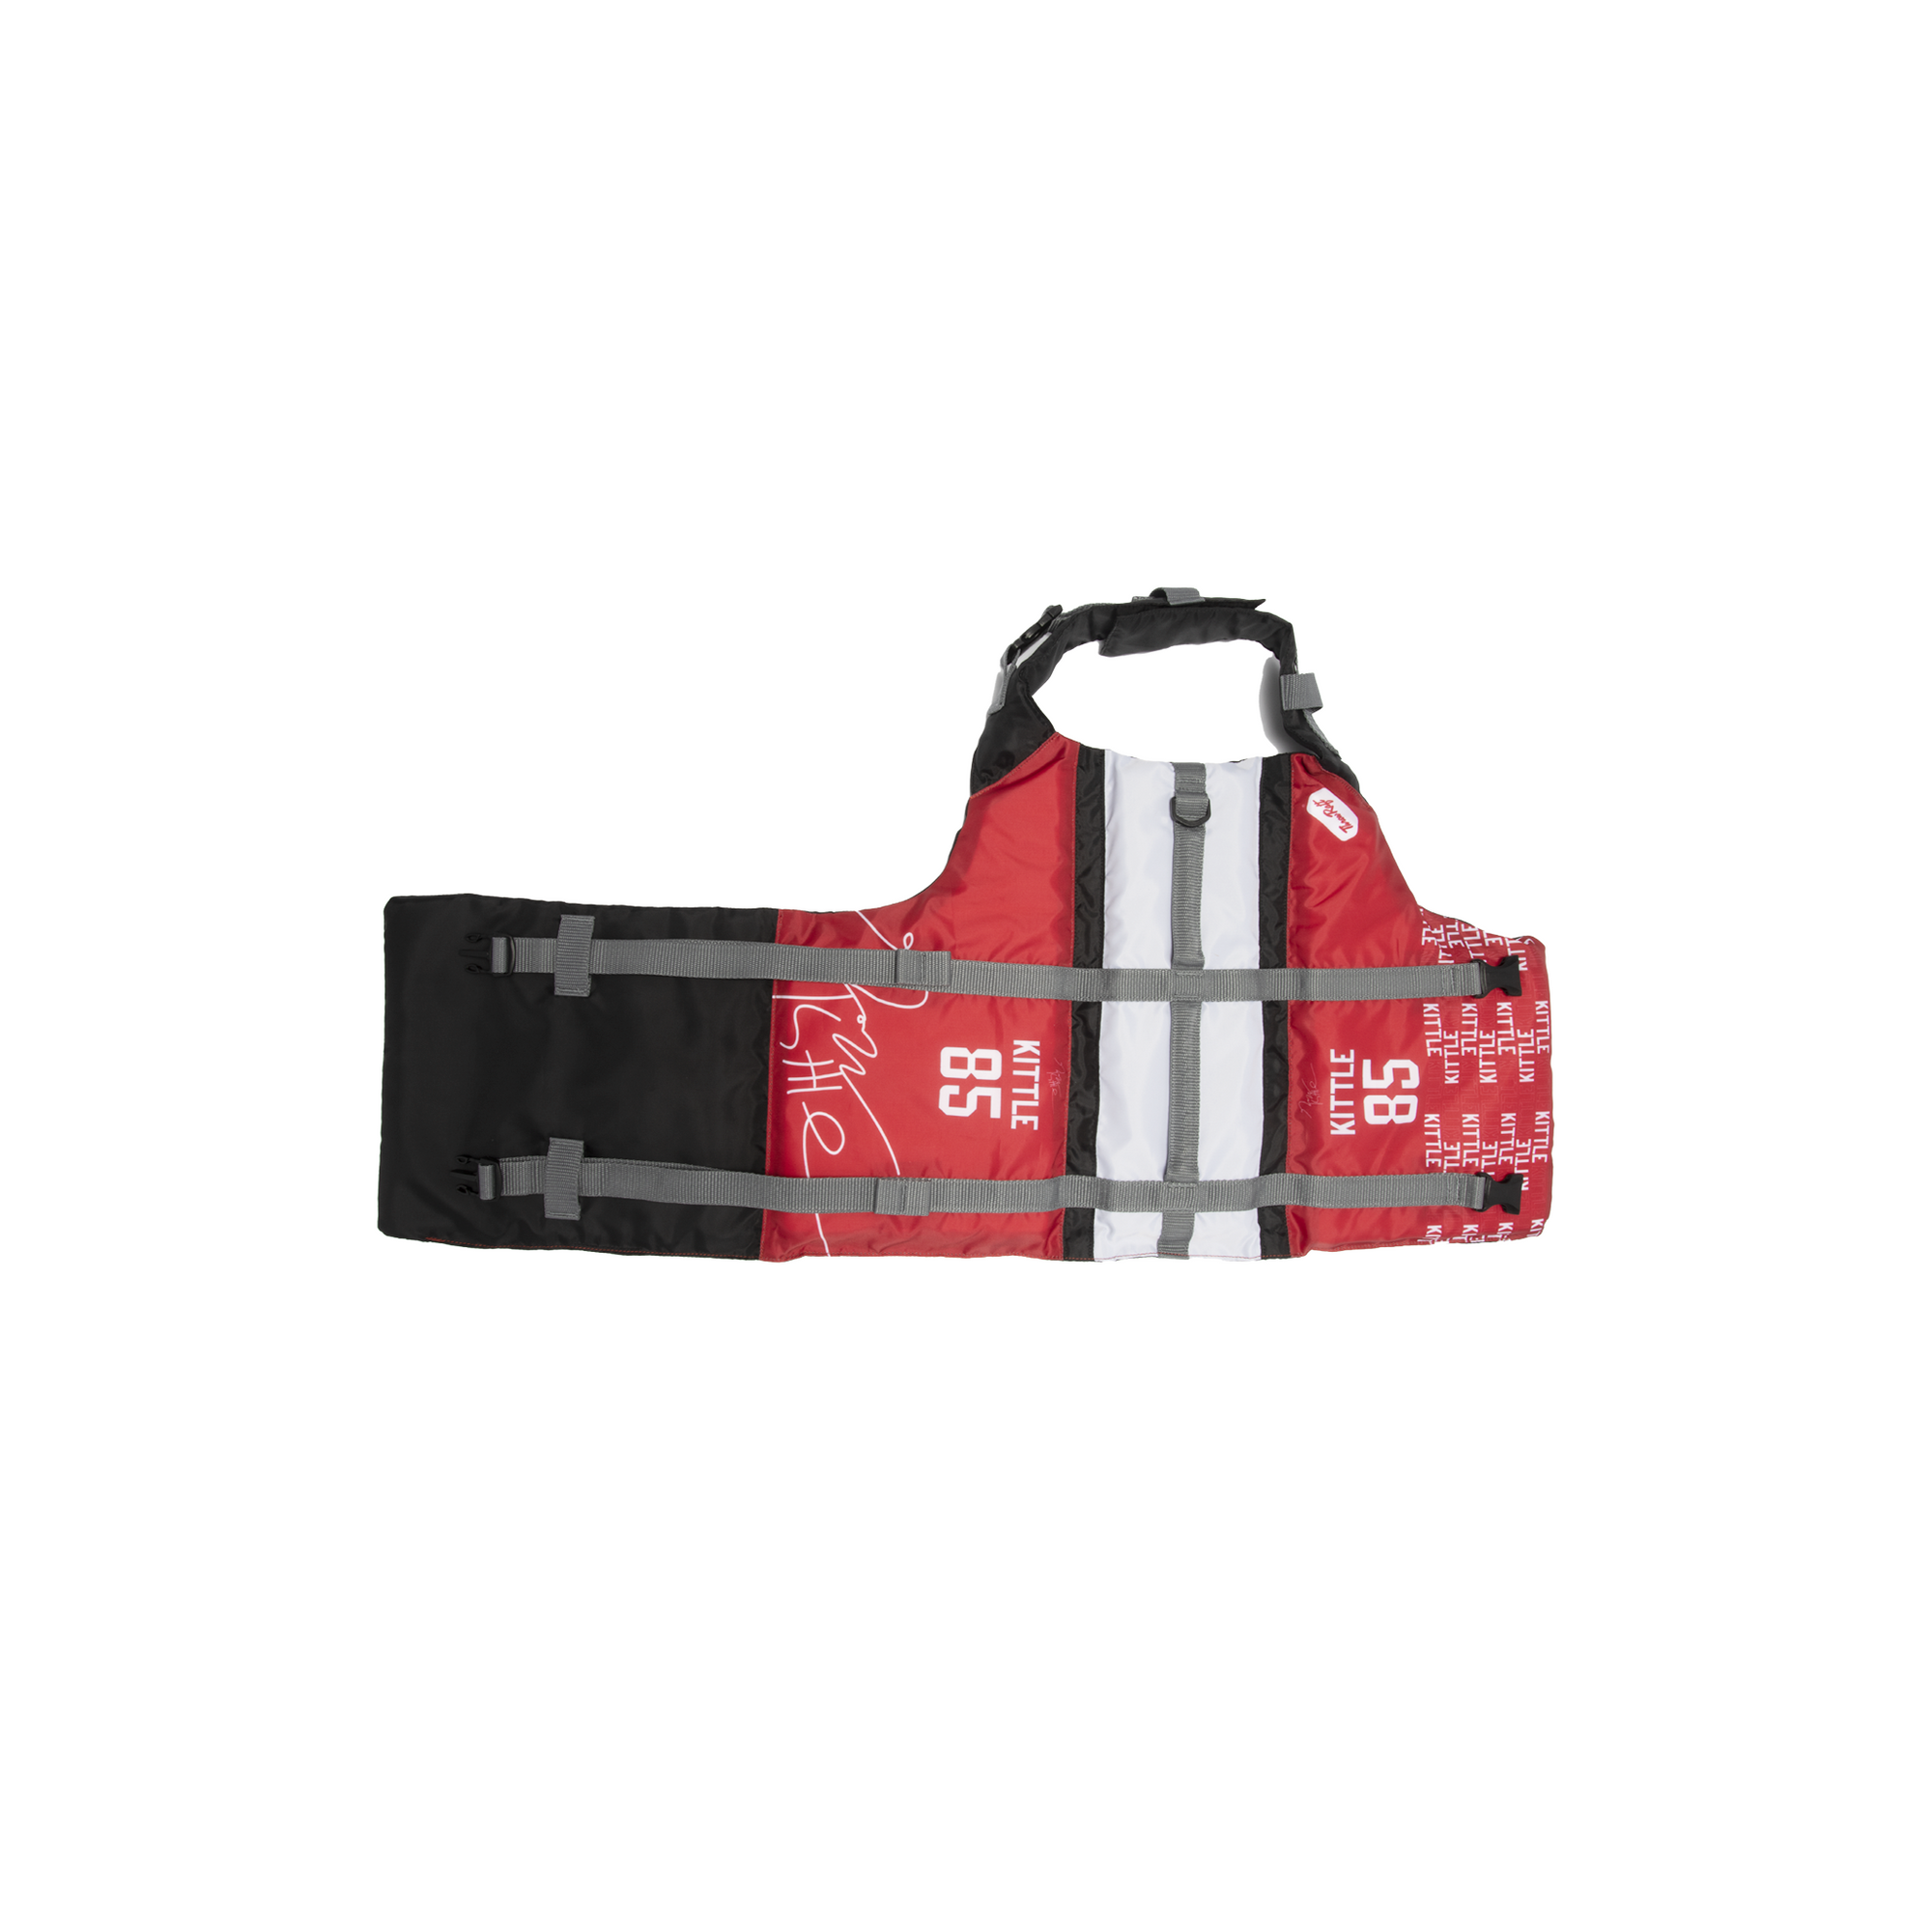 Justin Fields Signature NFL Youth Life Jacket - ThrowRaft